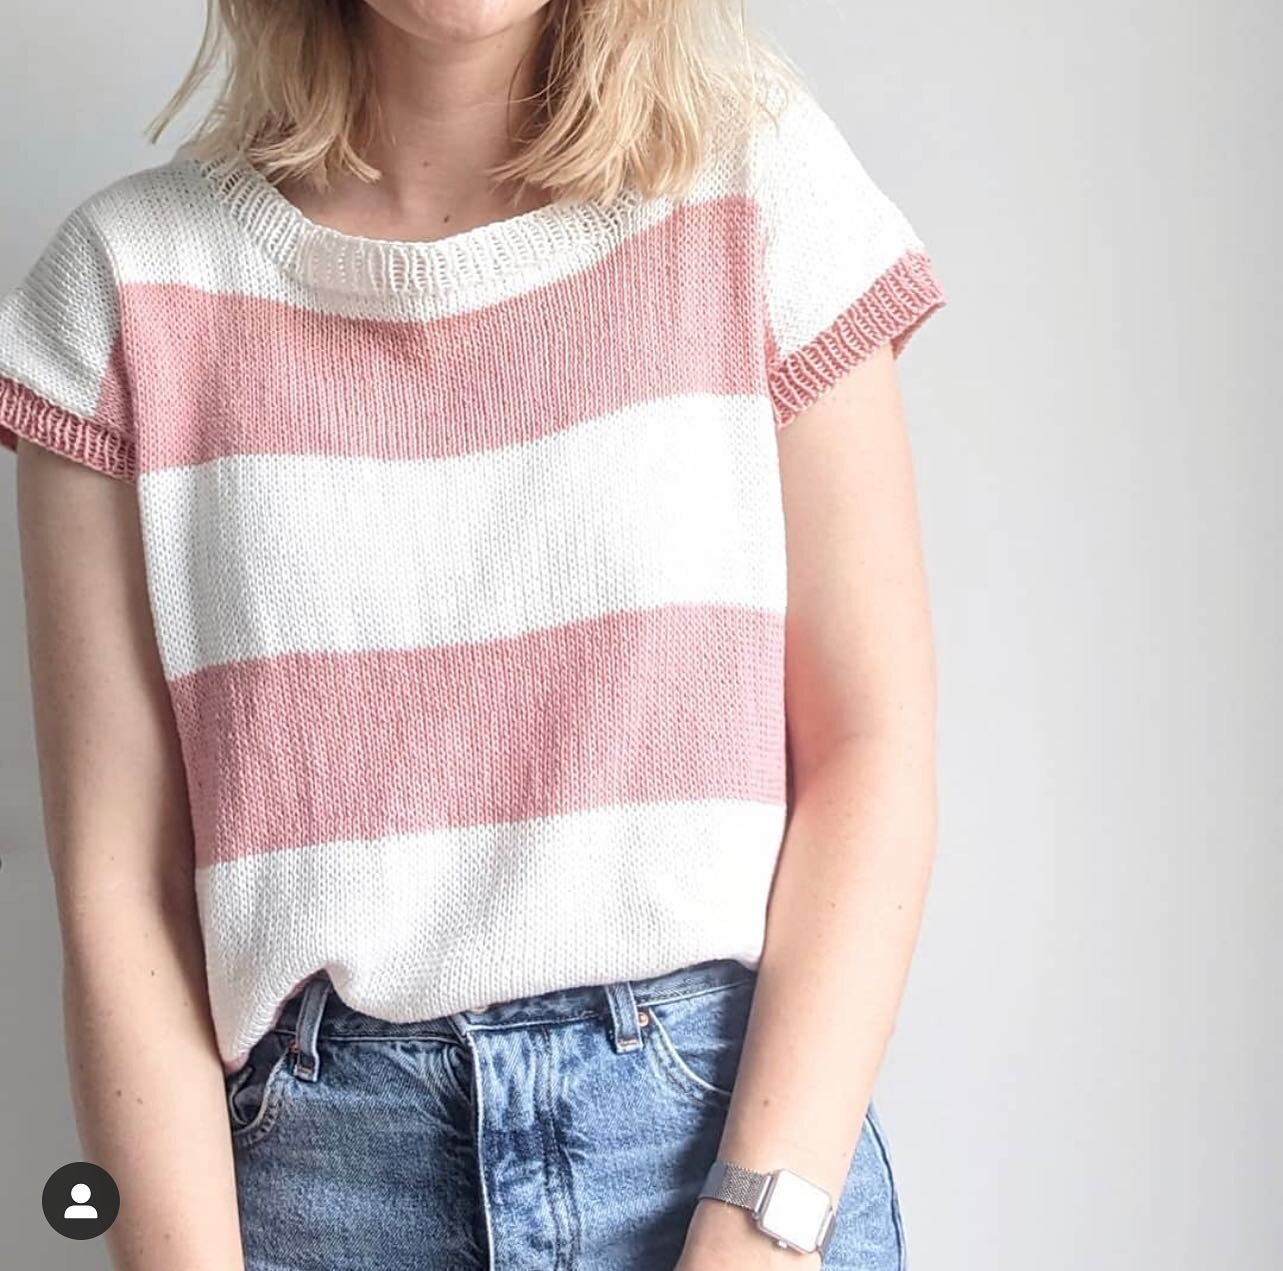 Just love this version of the Seacrest Tee Suzanne from @crochetkeepsthedoctoraway 💕
.
 This pattern is free on ashleylillis.com
.
Thanks, Suzanne, for sharing your beautiful work!
.
.
.
.
.
.
.
.
#freeknittingpattern #knittingpattern #knittinginspi